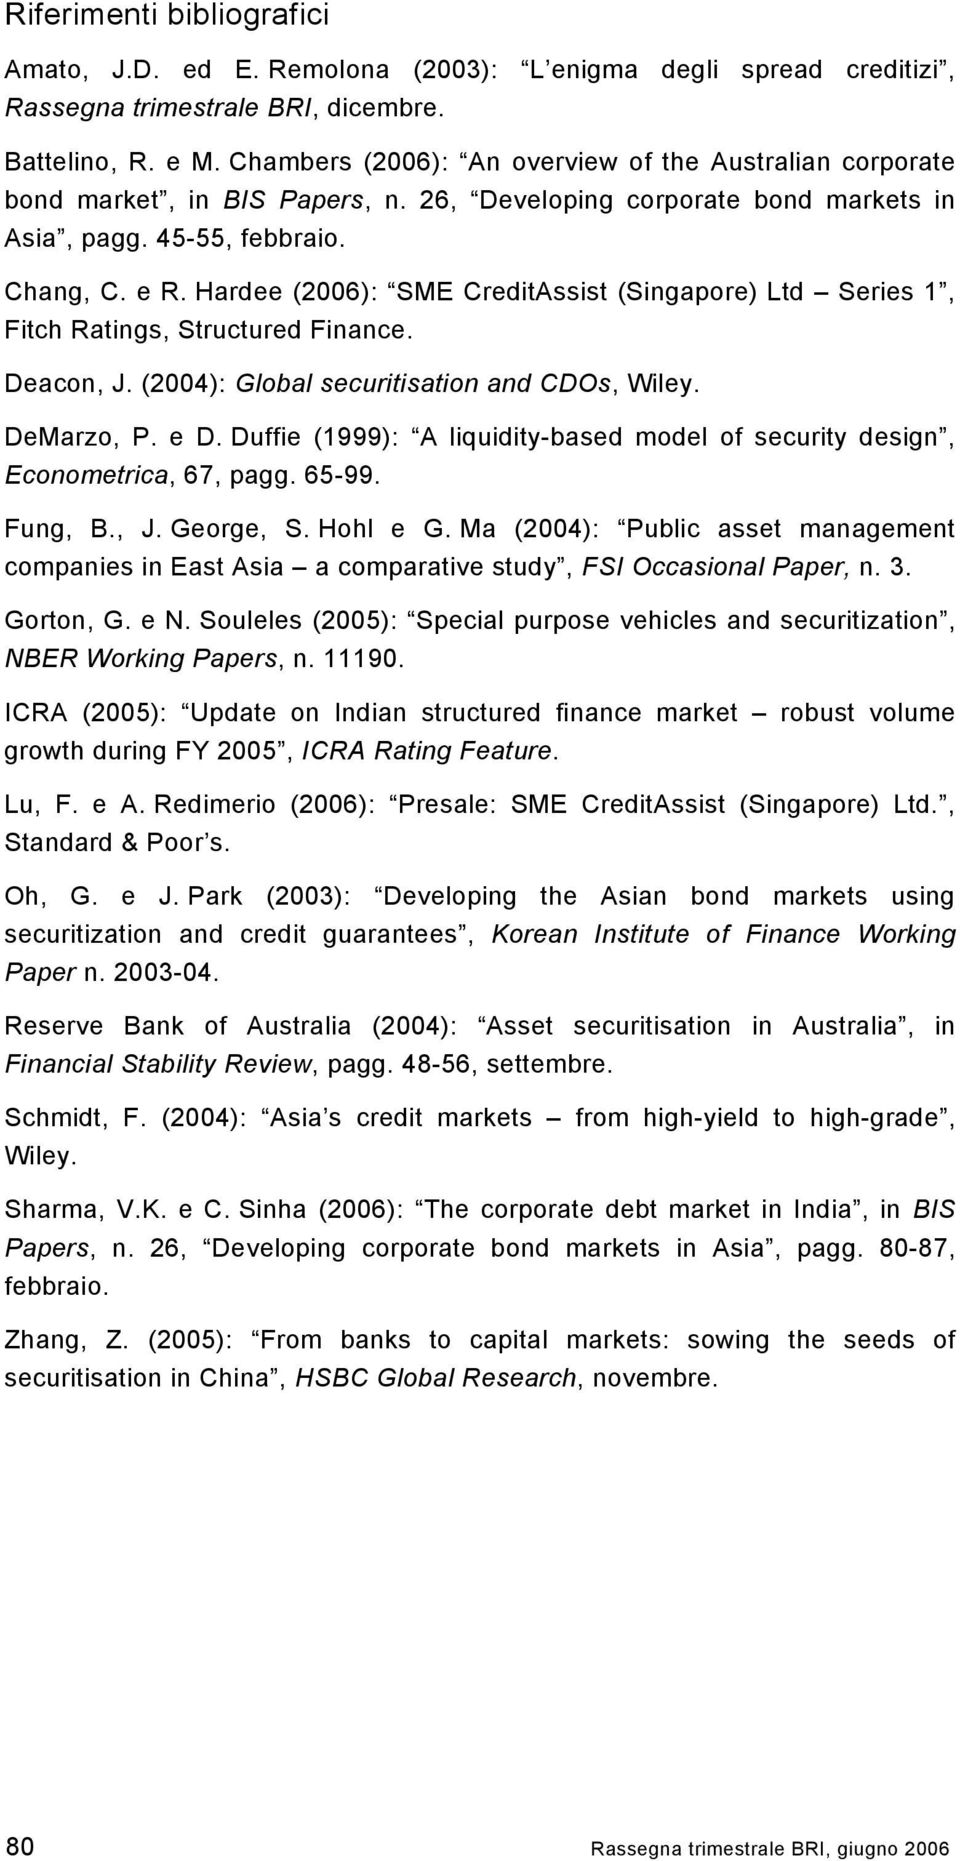 Hardee (26): SME CreditAssist (Singapore) Ltd Series 1, Fitch Ratings, Structured Finance. Deacon, J. (24): Global securitisation and CDOs, Wiley. DeMarzo, P. e D.